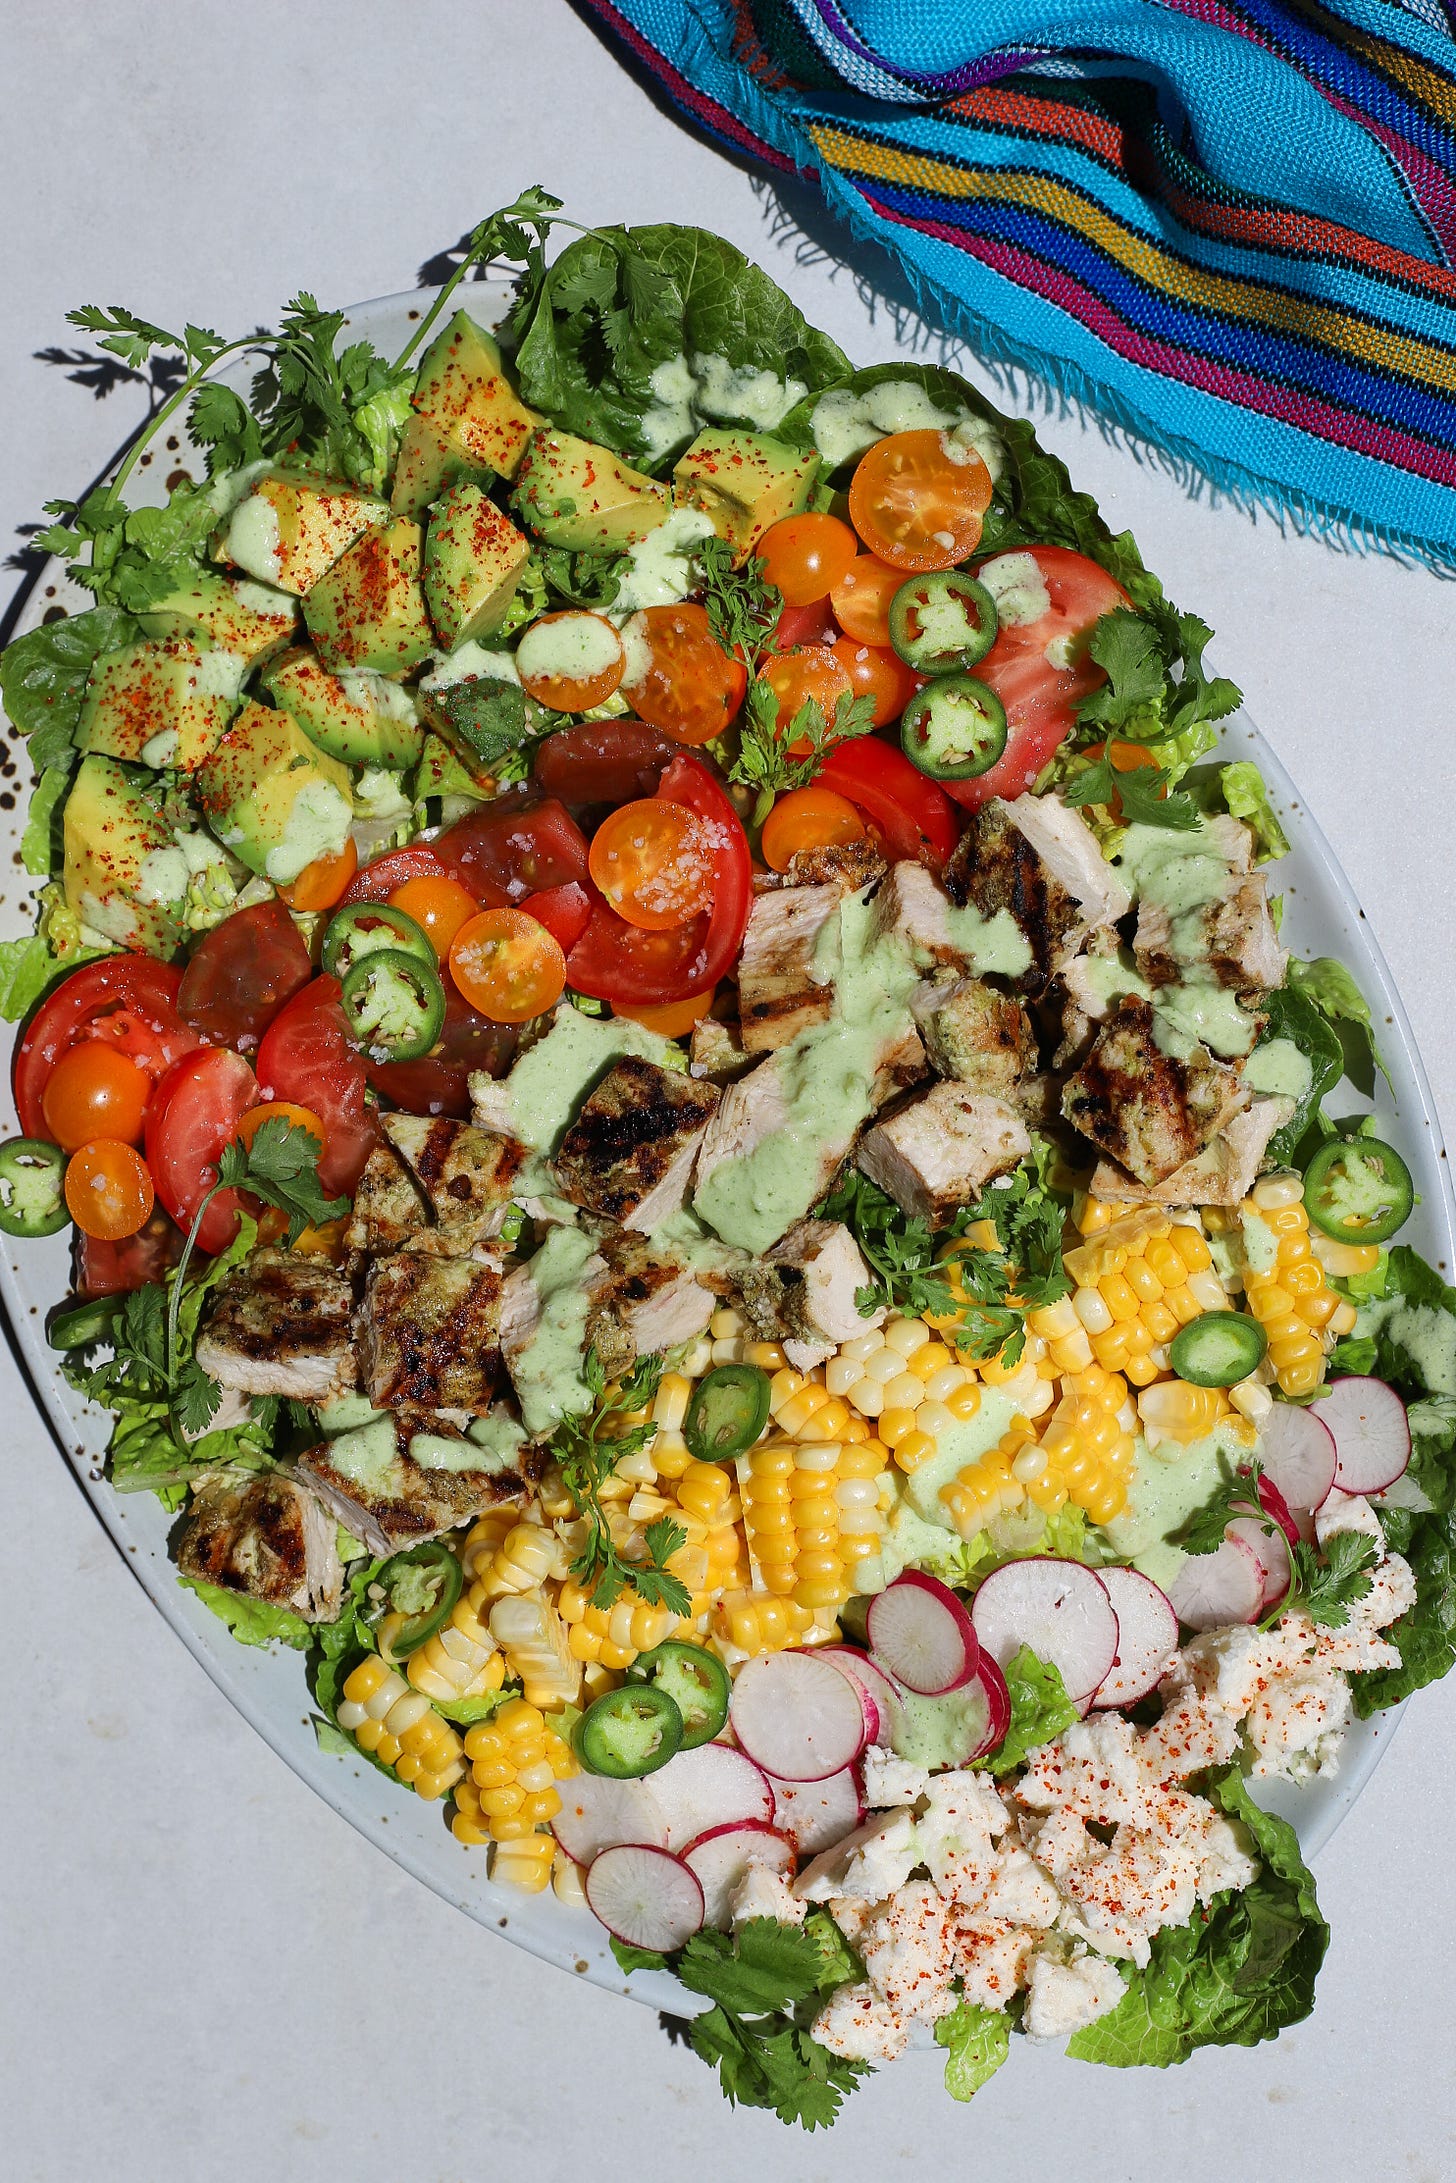 Oval platter with avocado, tomatoes, chicken, corn, radishes, and cheese lined up on shredded lettuce